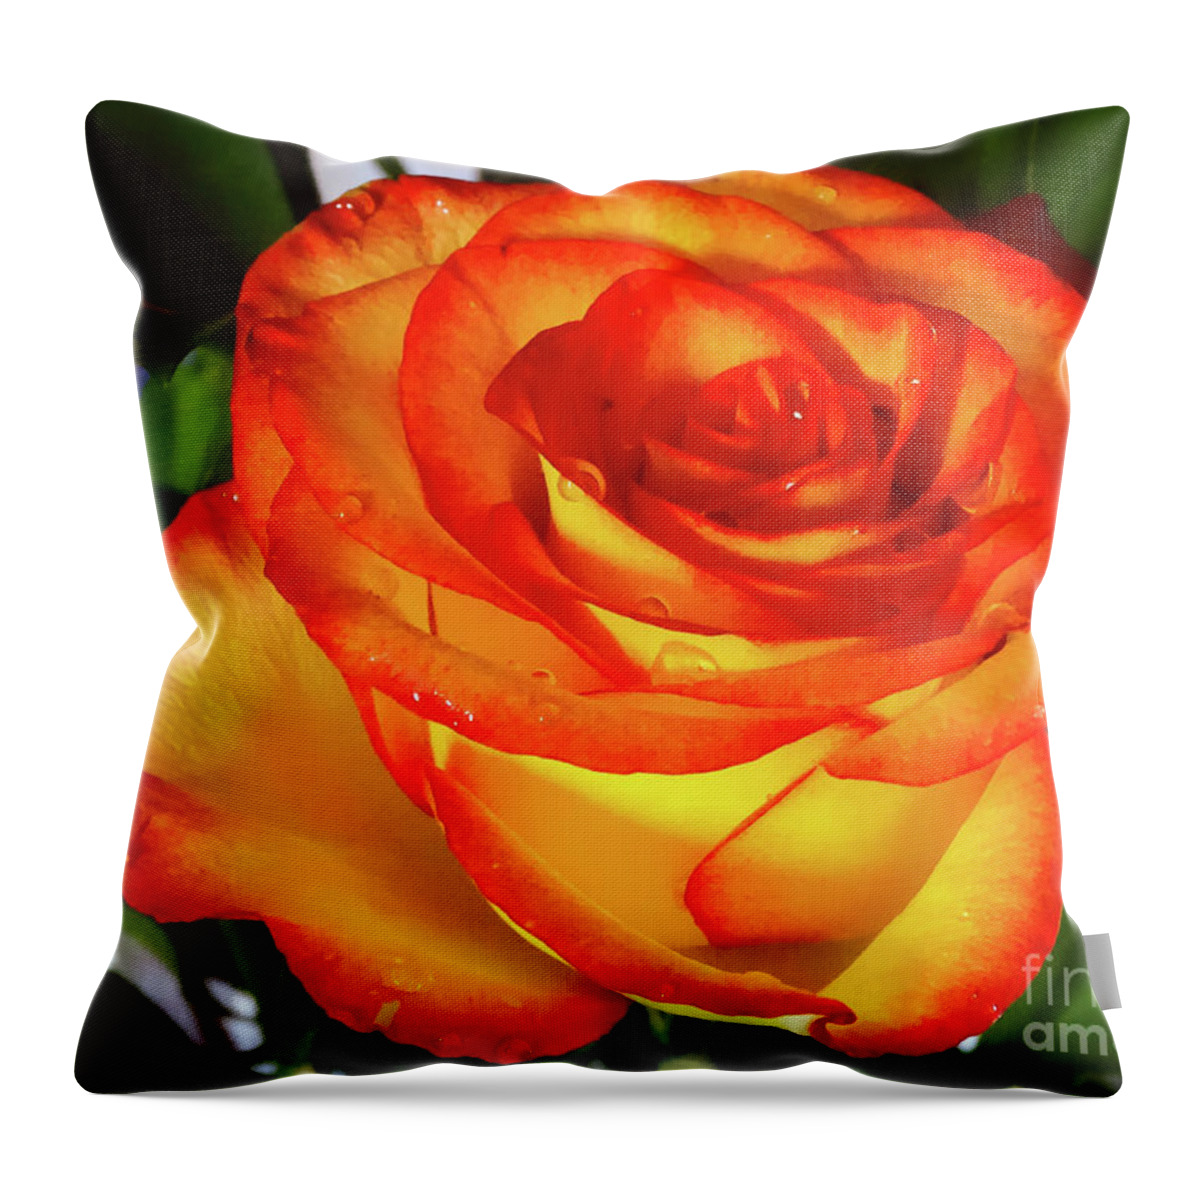 Orange Throw Pillow featuring the photograph The Rose by Camille Pascoe